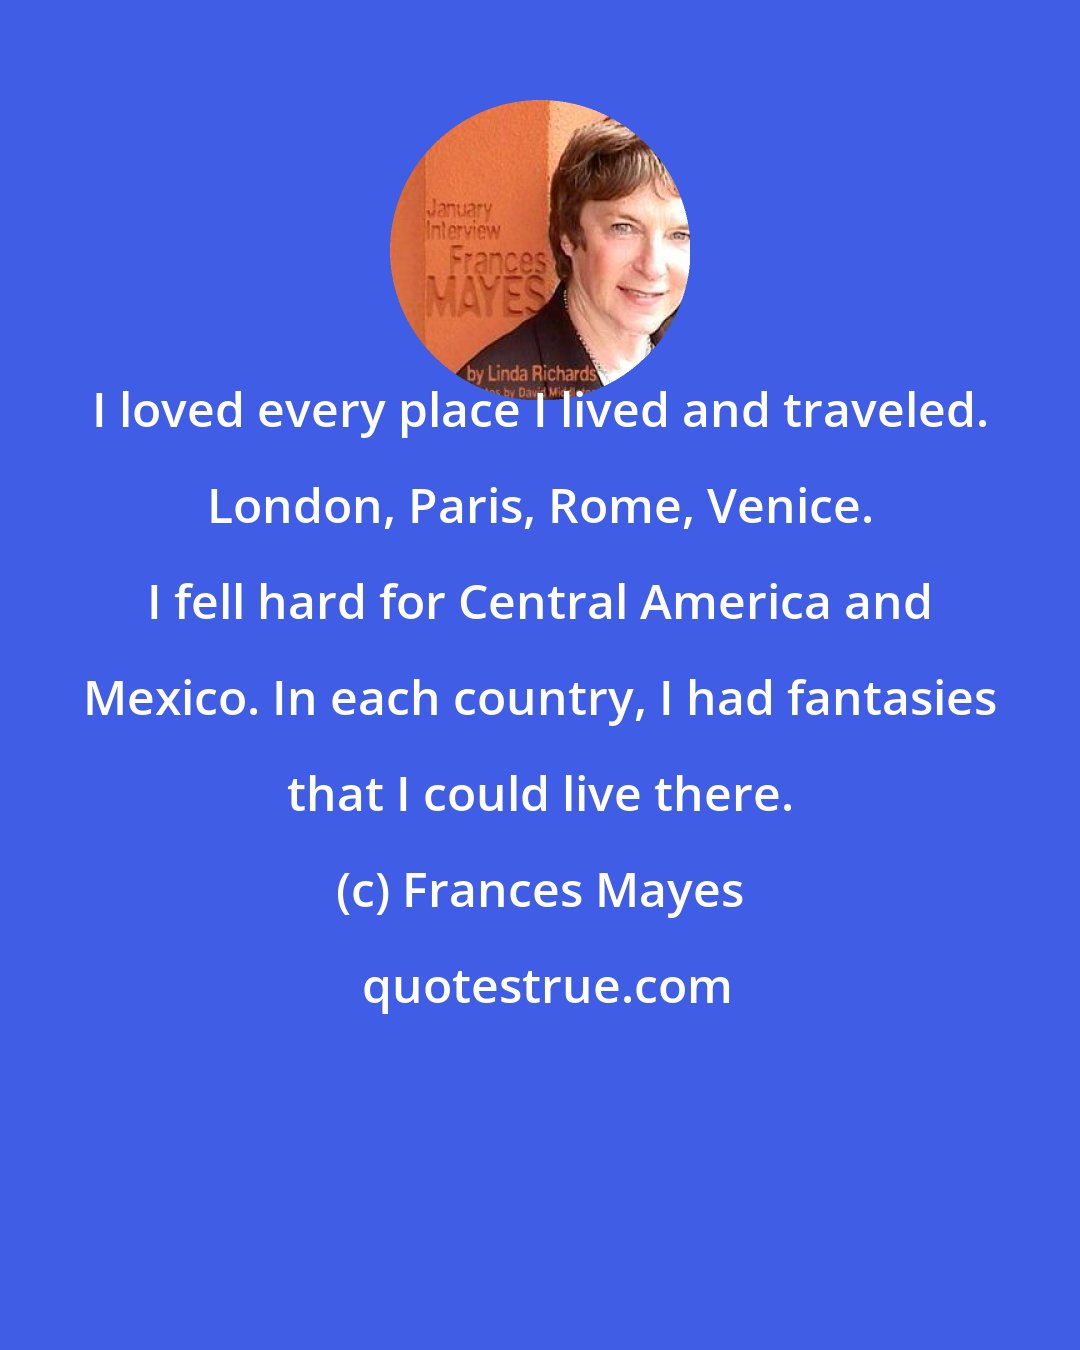 Frances Mayes: I loved every place I lived and traveled. London, Paris, Rome, Venice. I fell hard for Central America and Mexico. In each country, I had fantasies that I could live there.